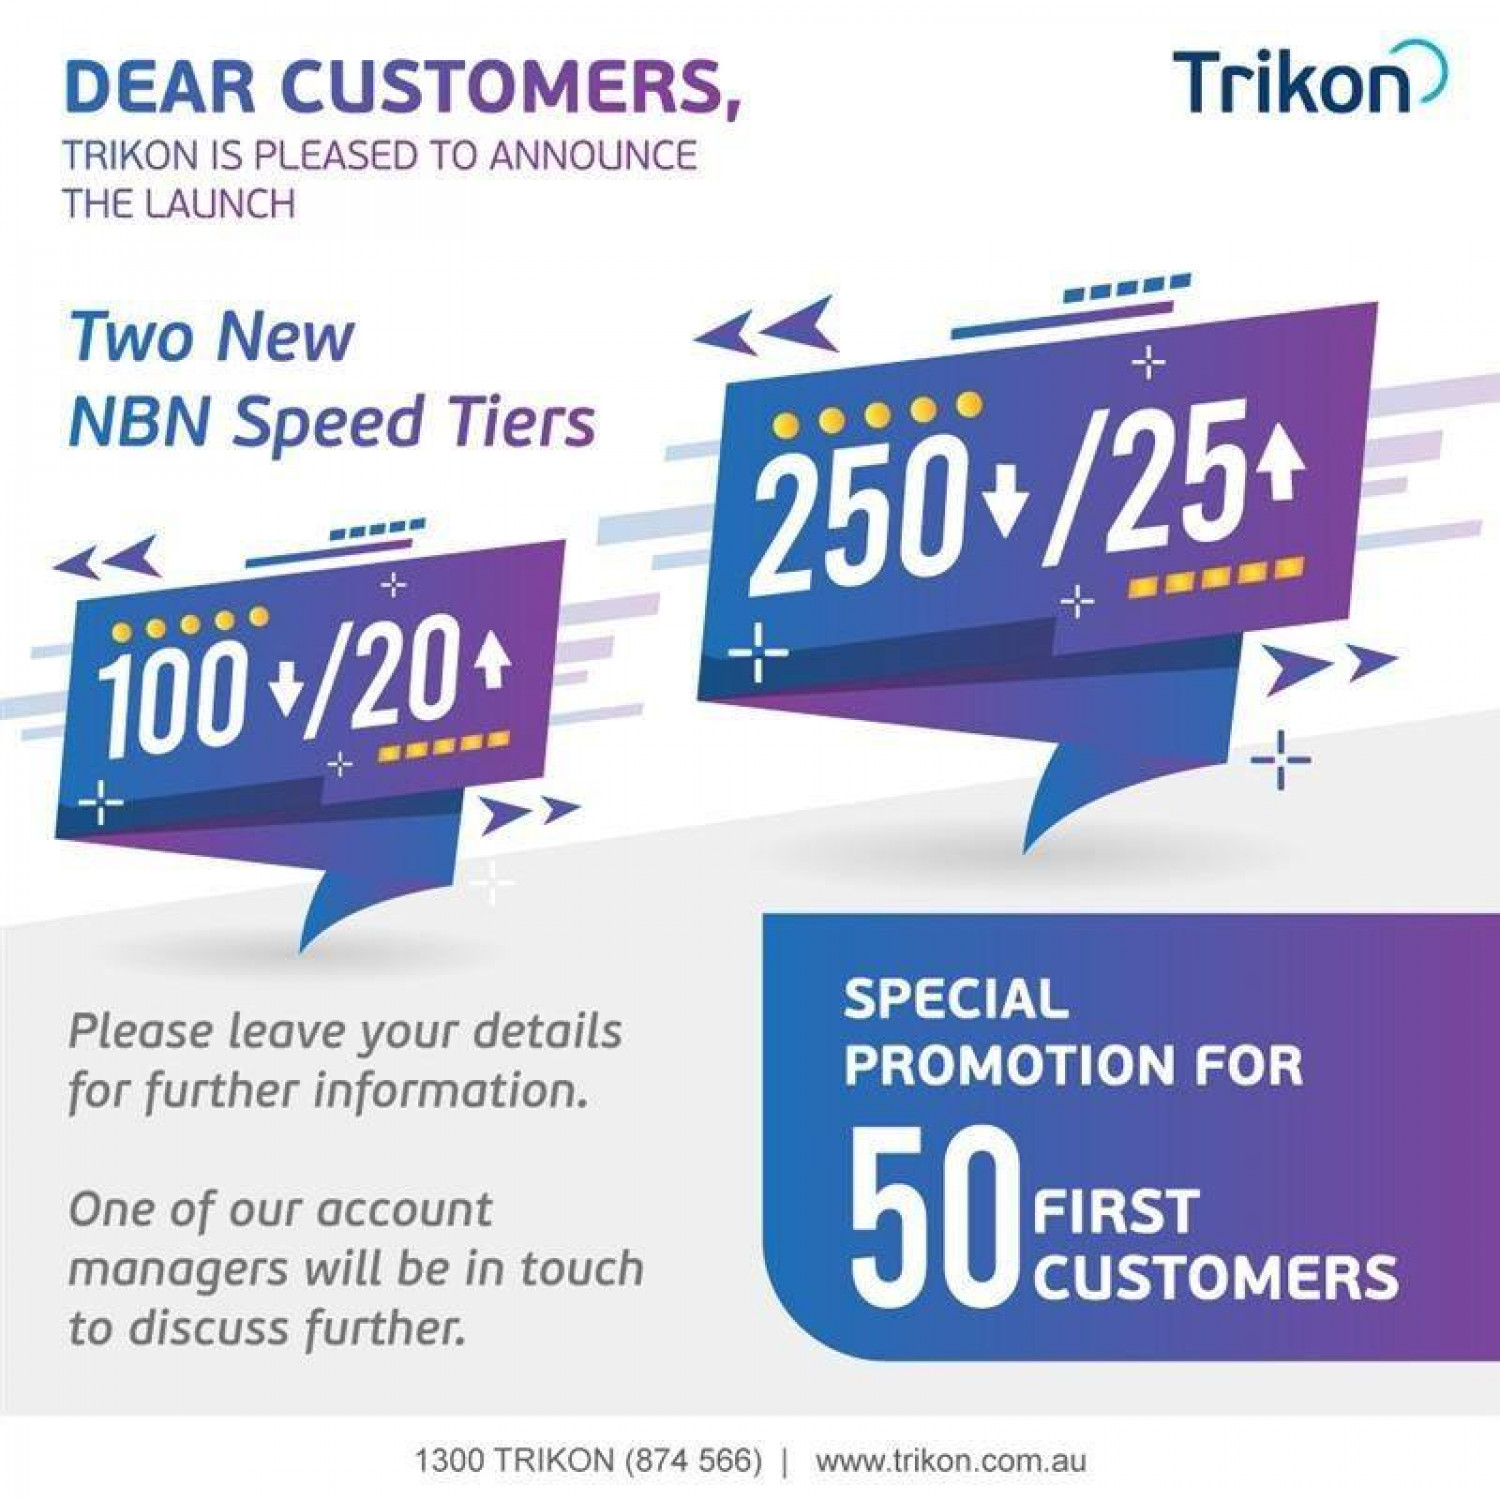 Trikon is pleased to announce the launch two new NBN speed tiers Infographic